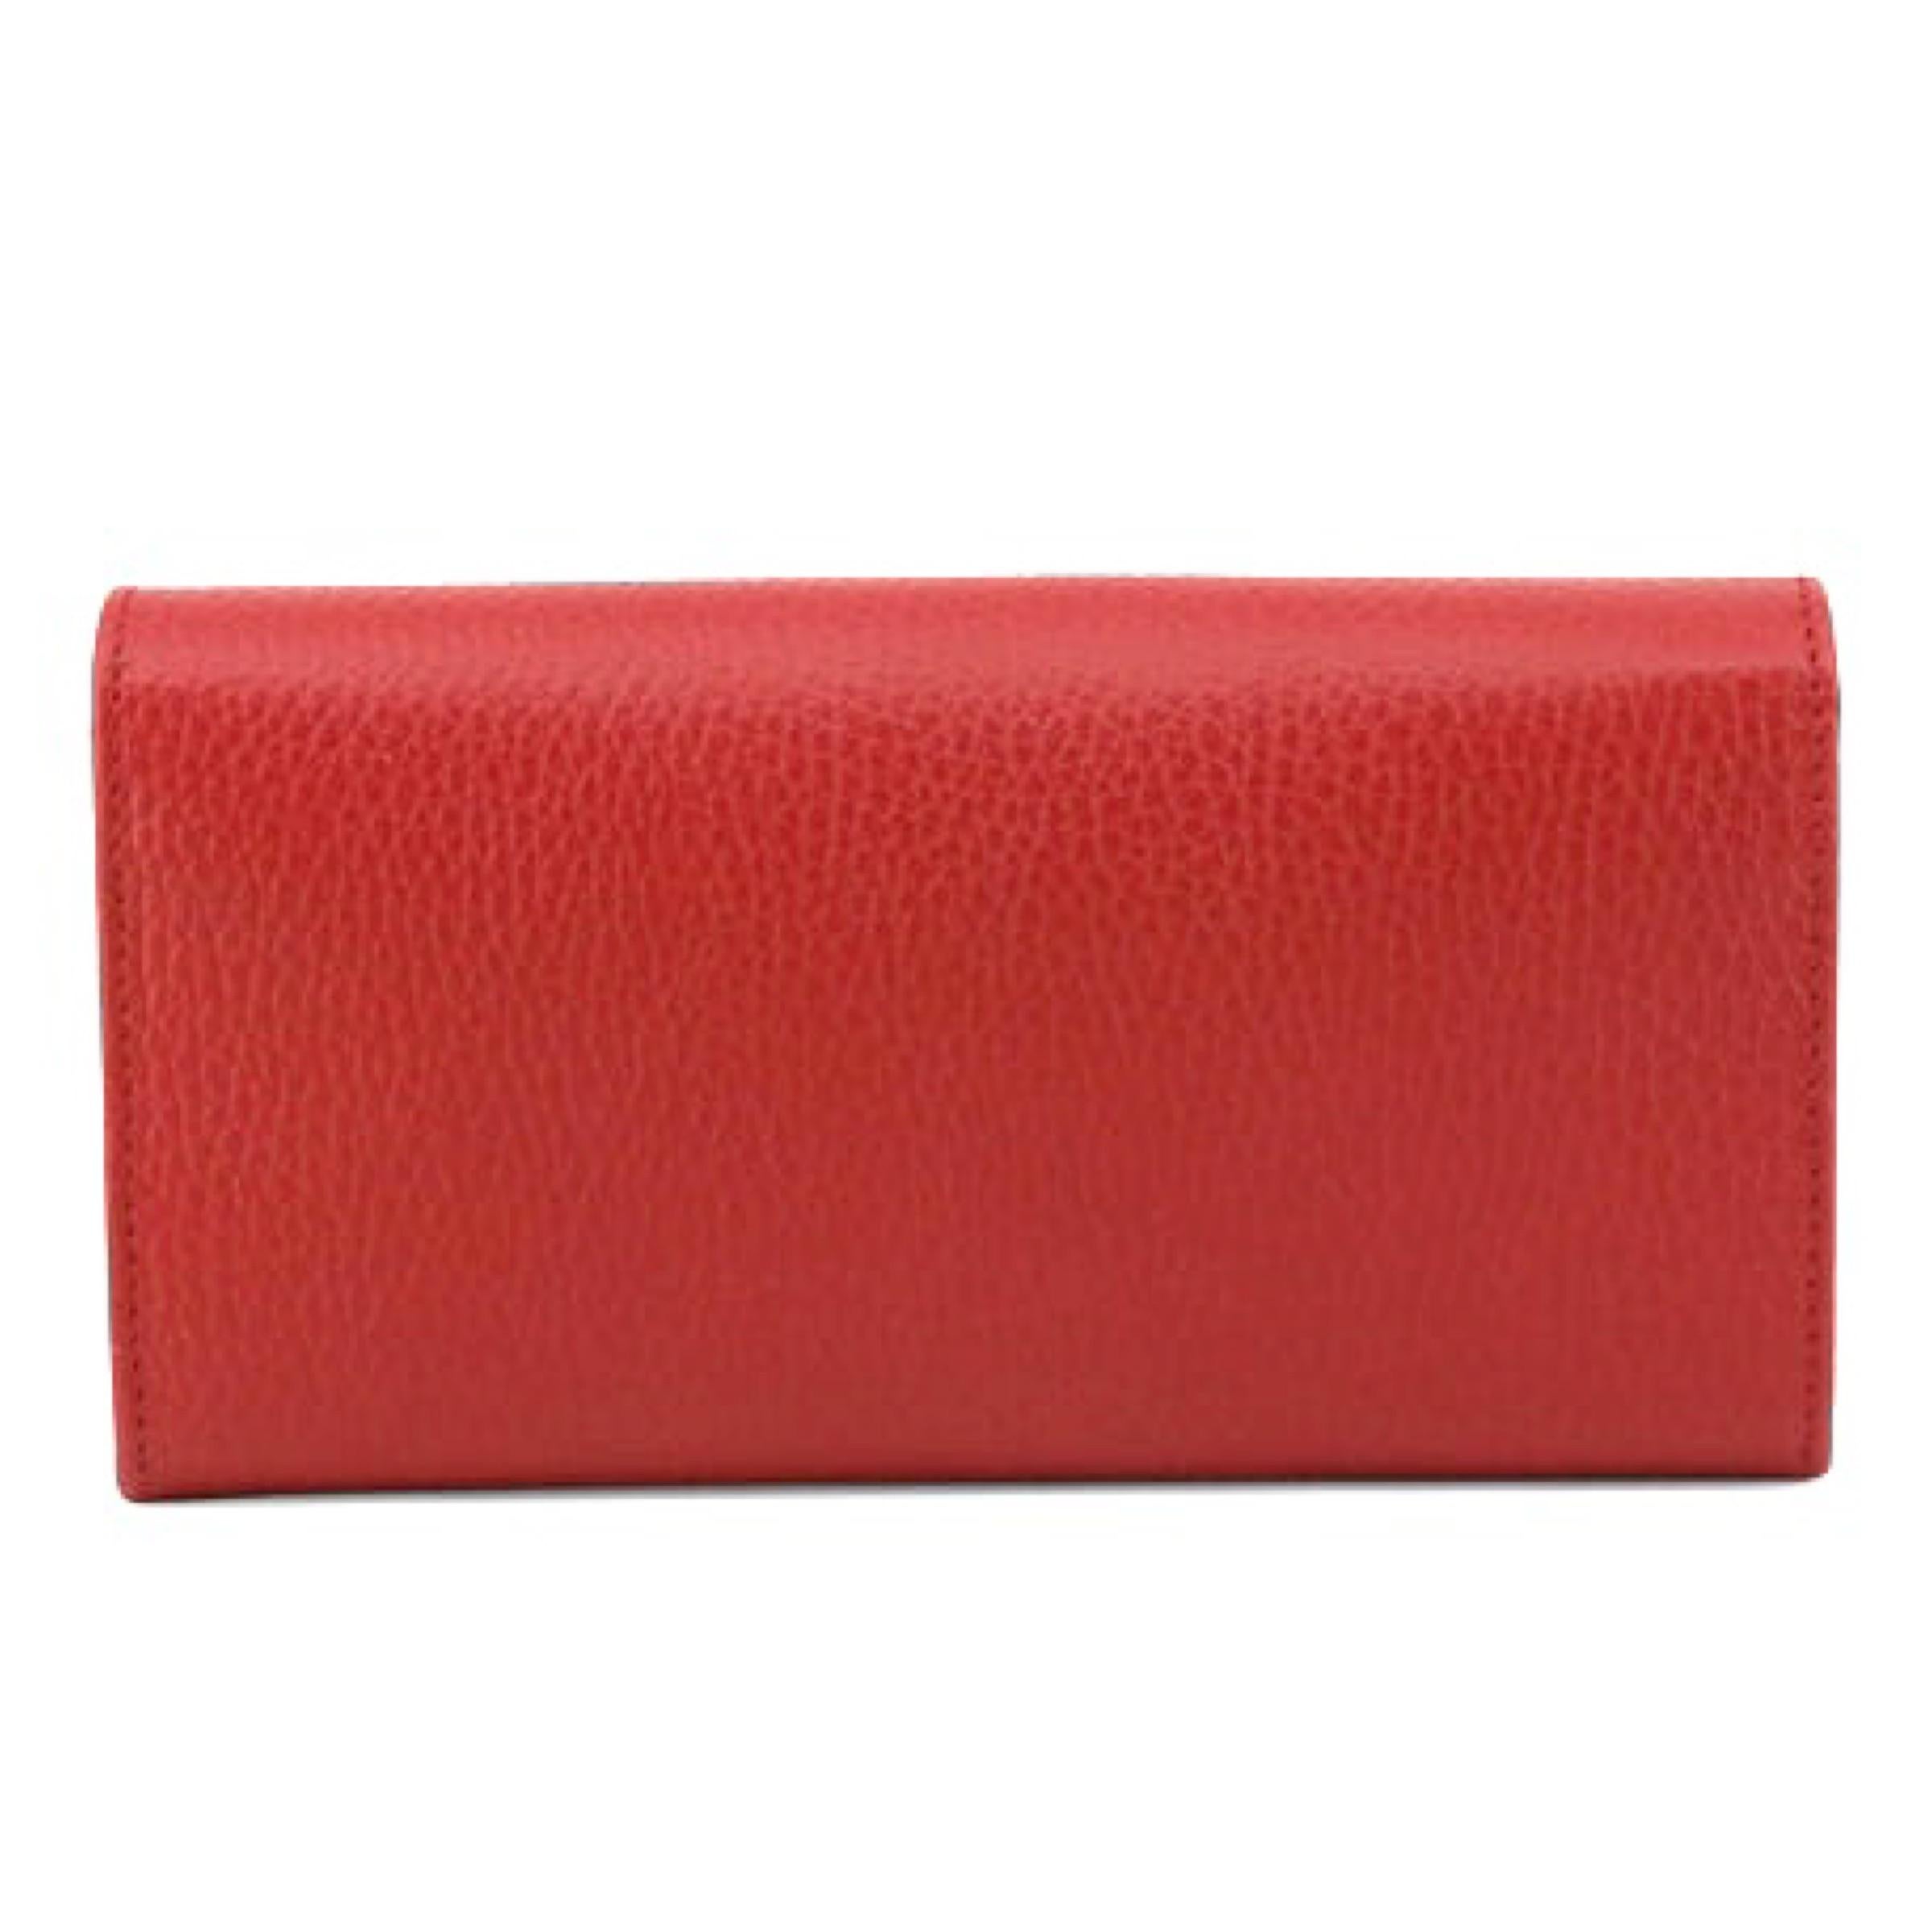 Women's NEW Gucci Red Interlocking G Leather Long Wallet Clutch Bag For Sale